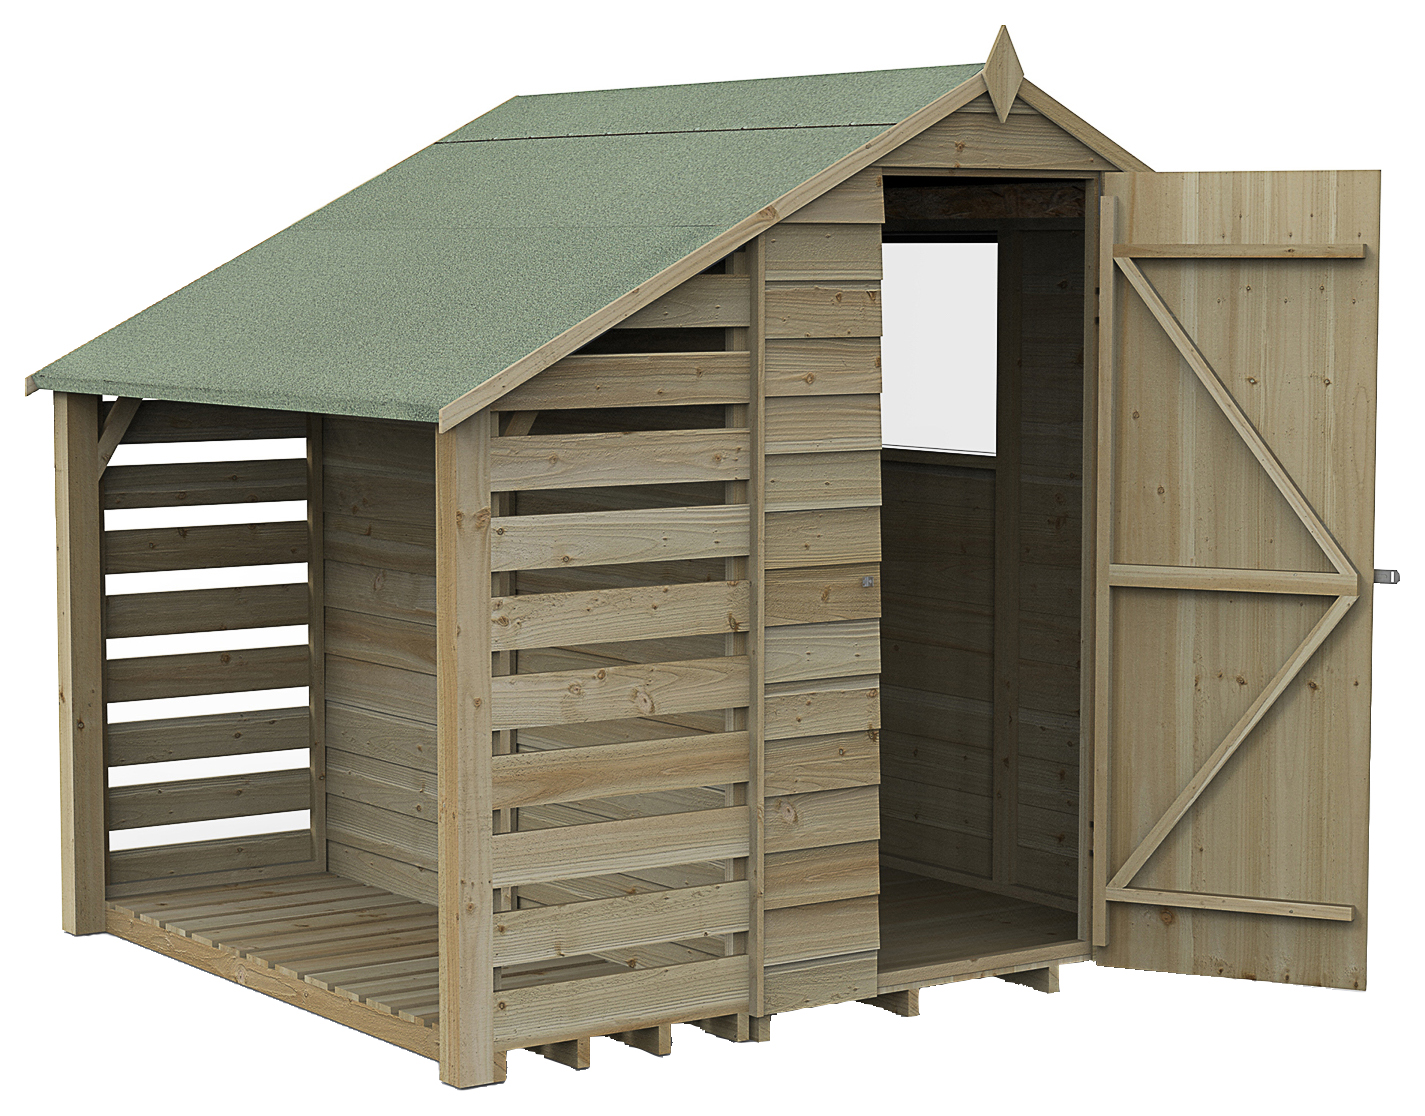 Forest Garden 6 x 4ft 4Life Apex Overlap Pressure Treated Shed with Lean-To and Assembly